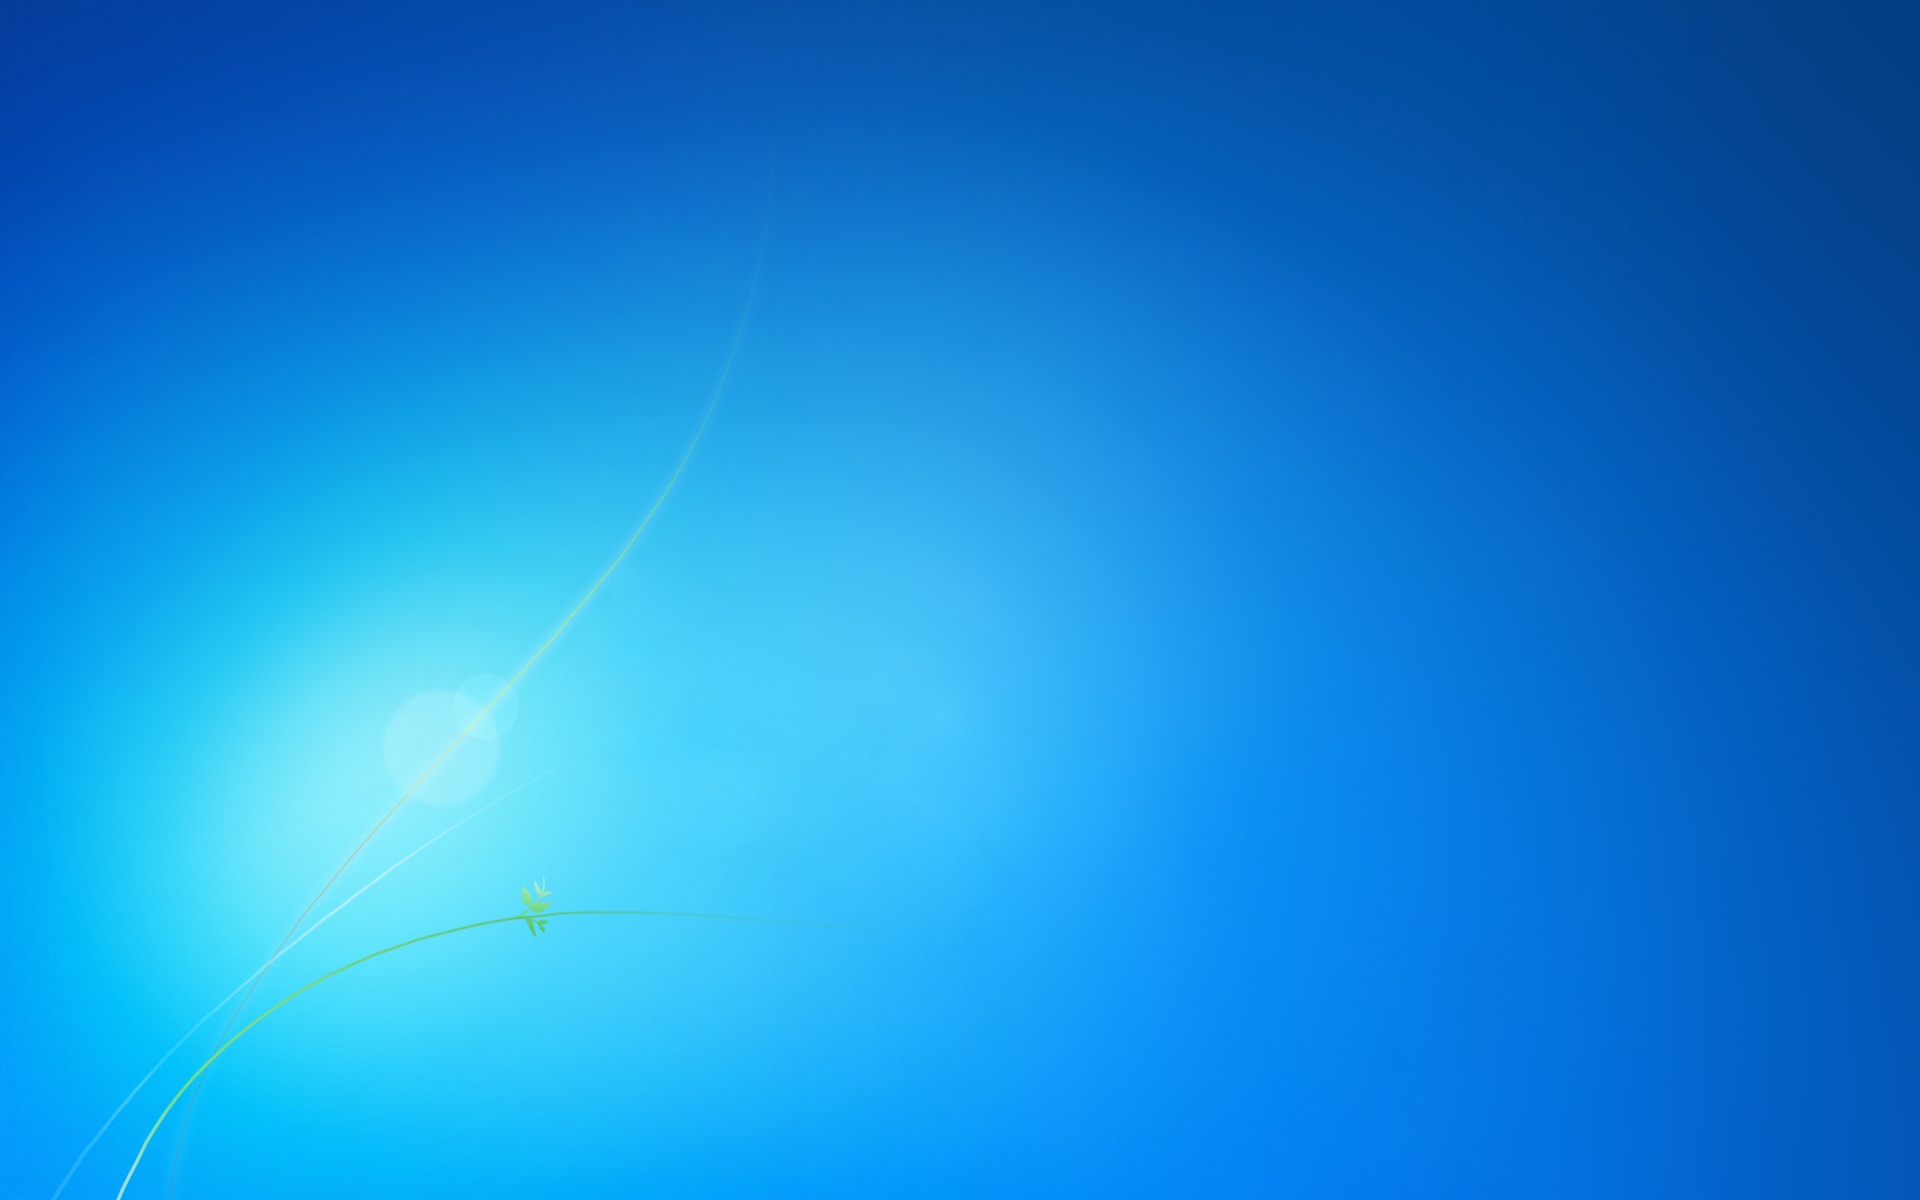 3d Wallpaper Windows 7 Wallpapers For Free Download About 3539